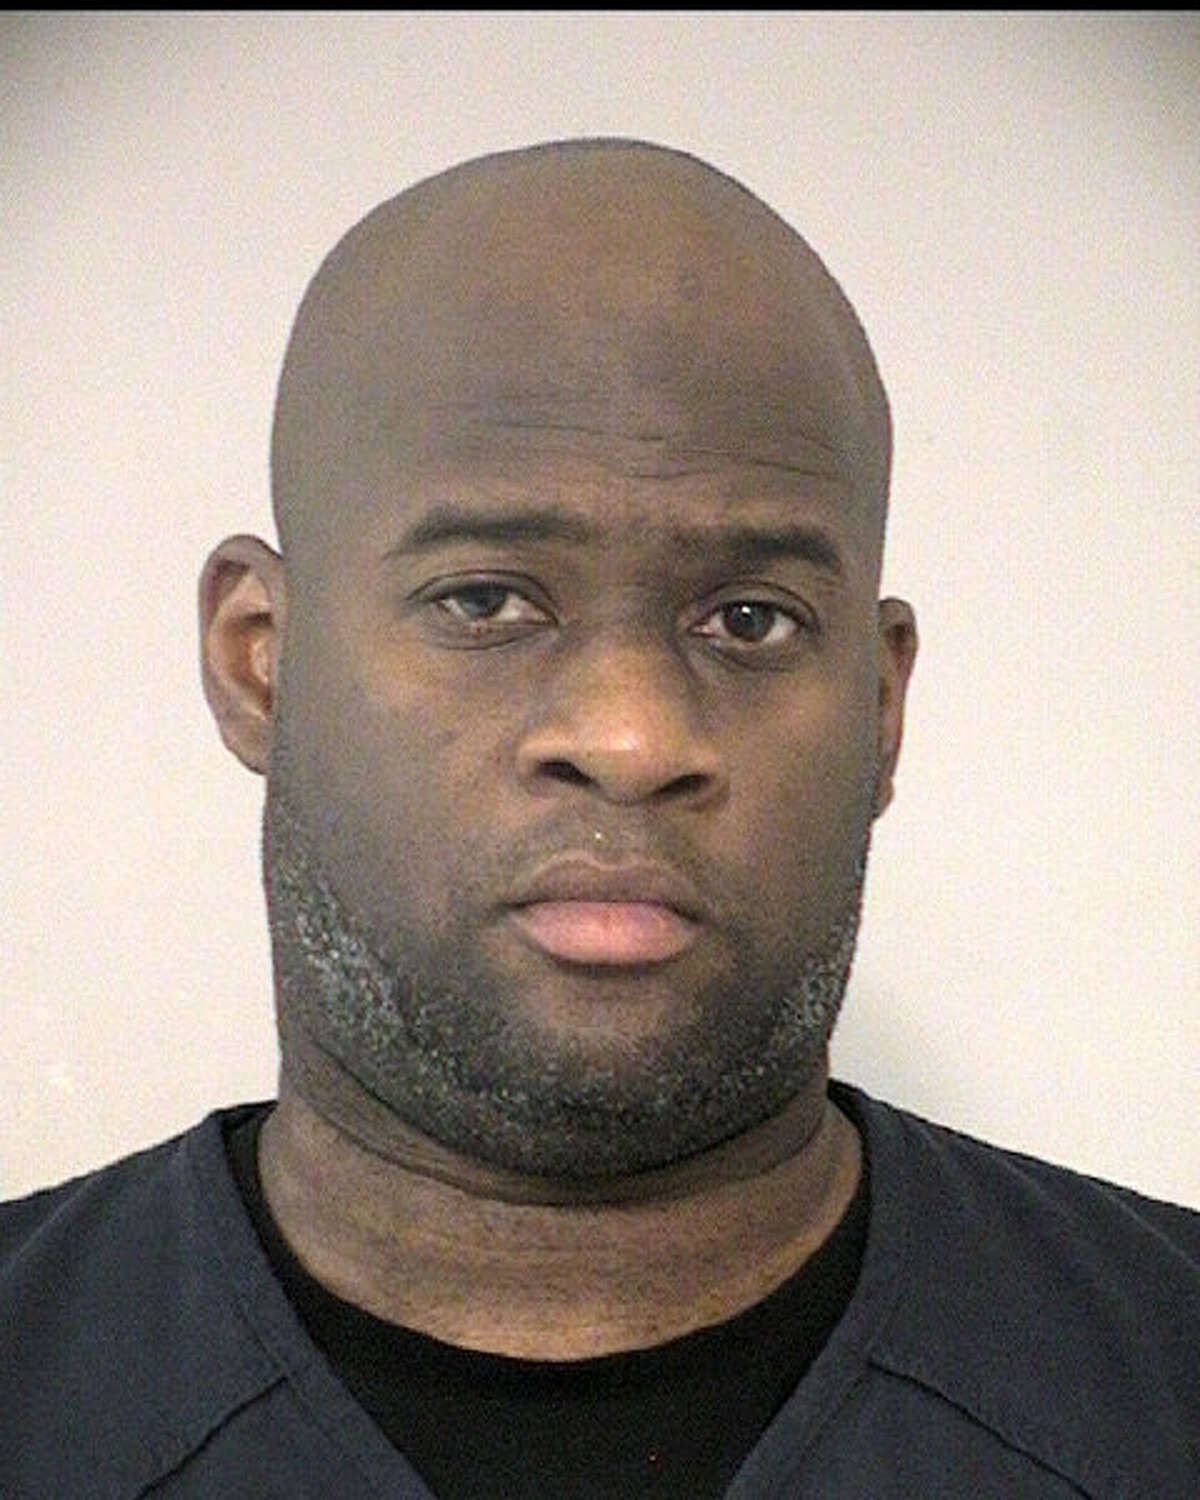 Vince Young  In February of this year, the former Texas Longhorns quarterback was arrested in Fort Bend County after being accused of drunk driving. He's now faced that charge due to two separate incidents. >>>Check out some of the famous celebrites, politicians, athletes and more who have been arrested. 